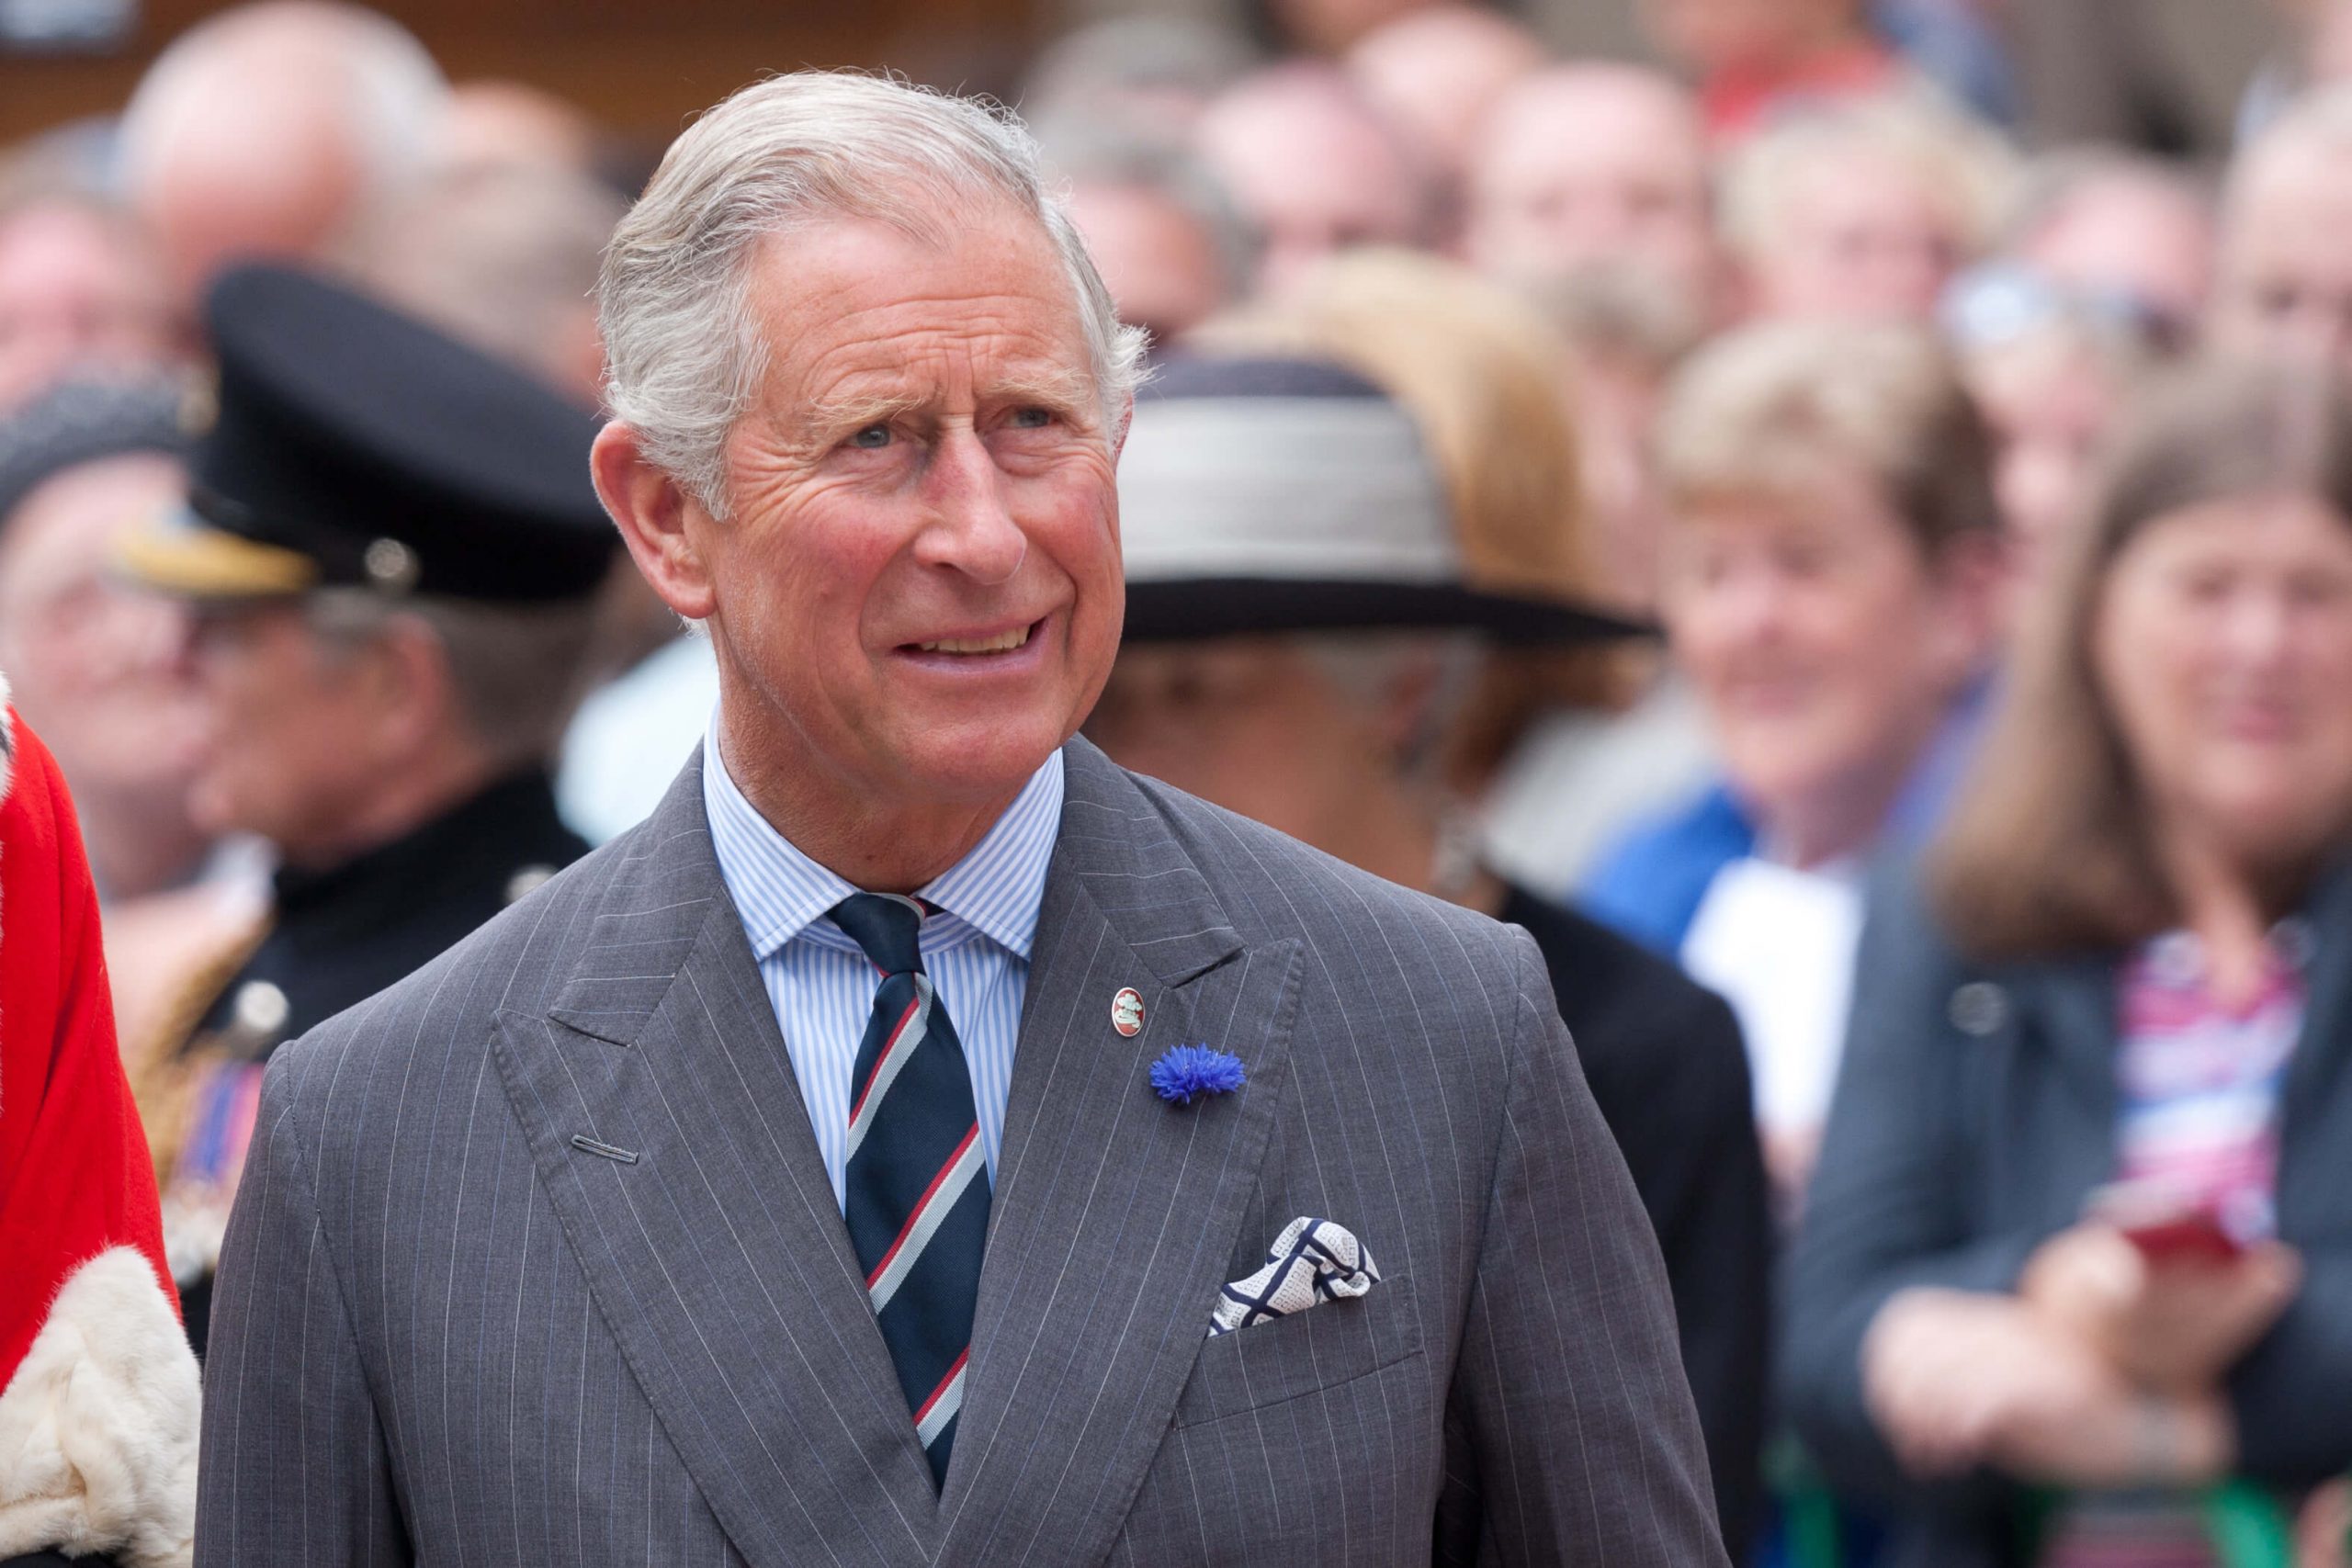 next king of uk will be prince charles